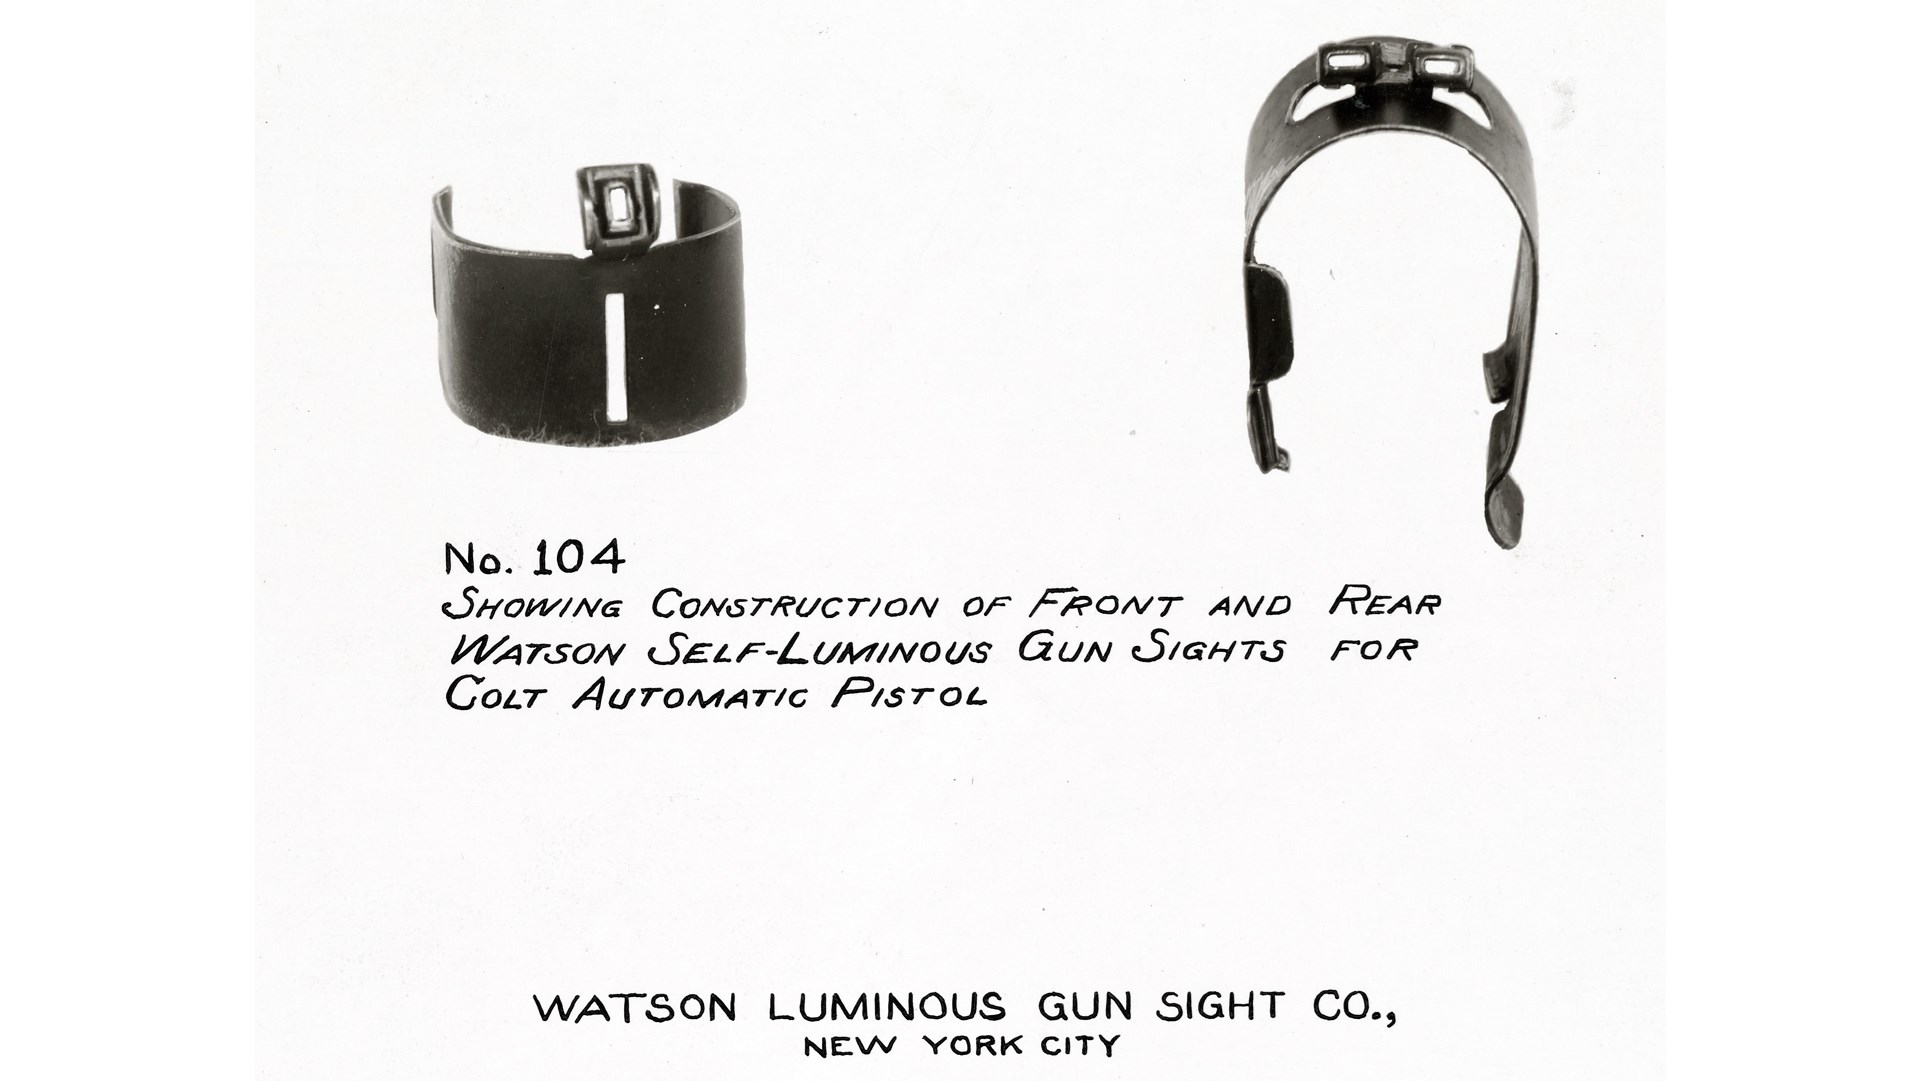 Text on image noting No.104 SHOWING CONSTRUCTION OF FRONT AND REAR WATSON SELF-LUMINOUS GUN SIGHTS FOR COLT AUTOMATIC PISTOL